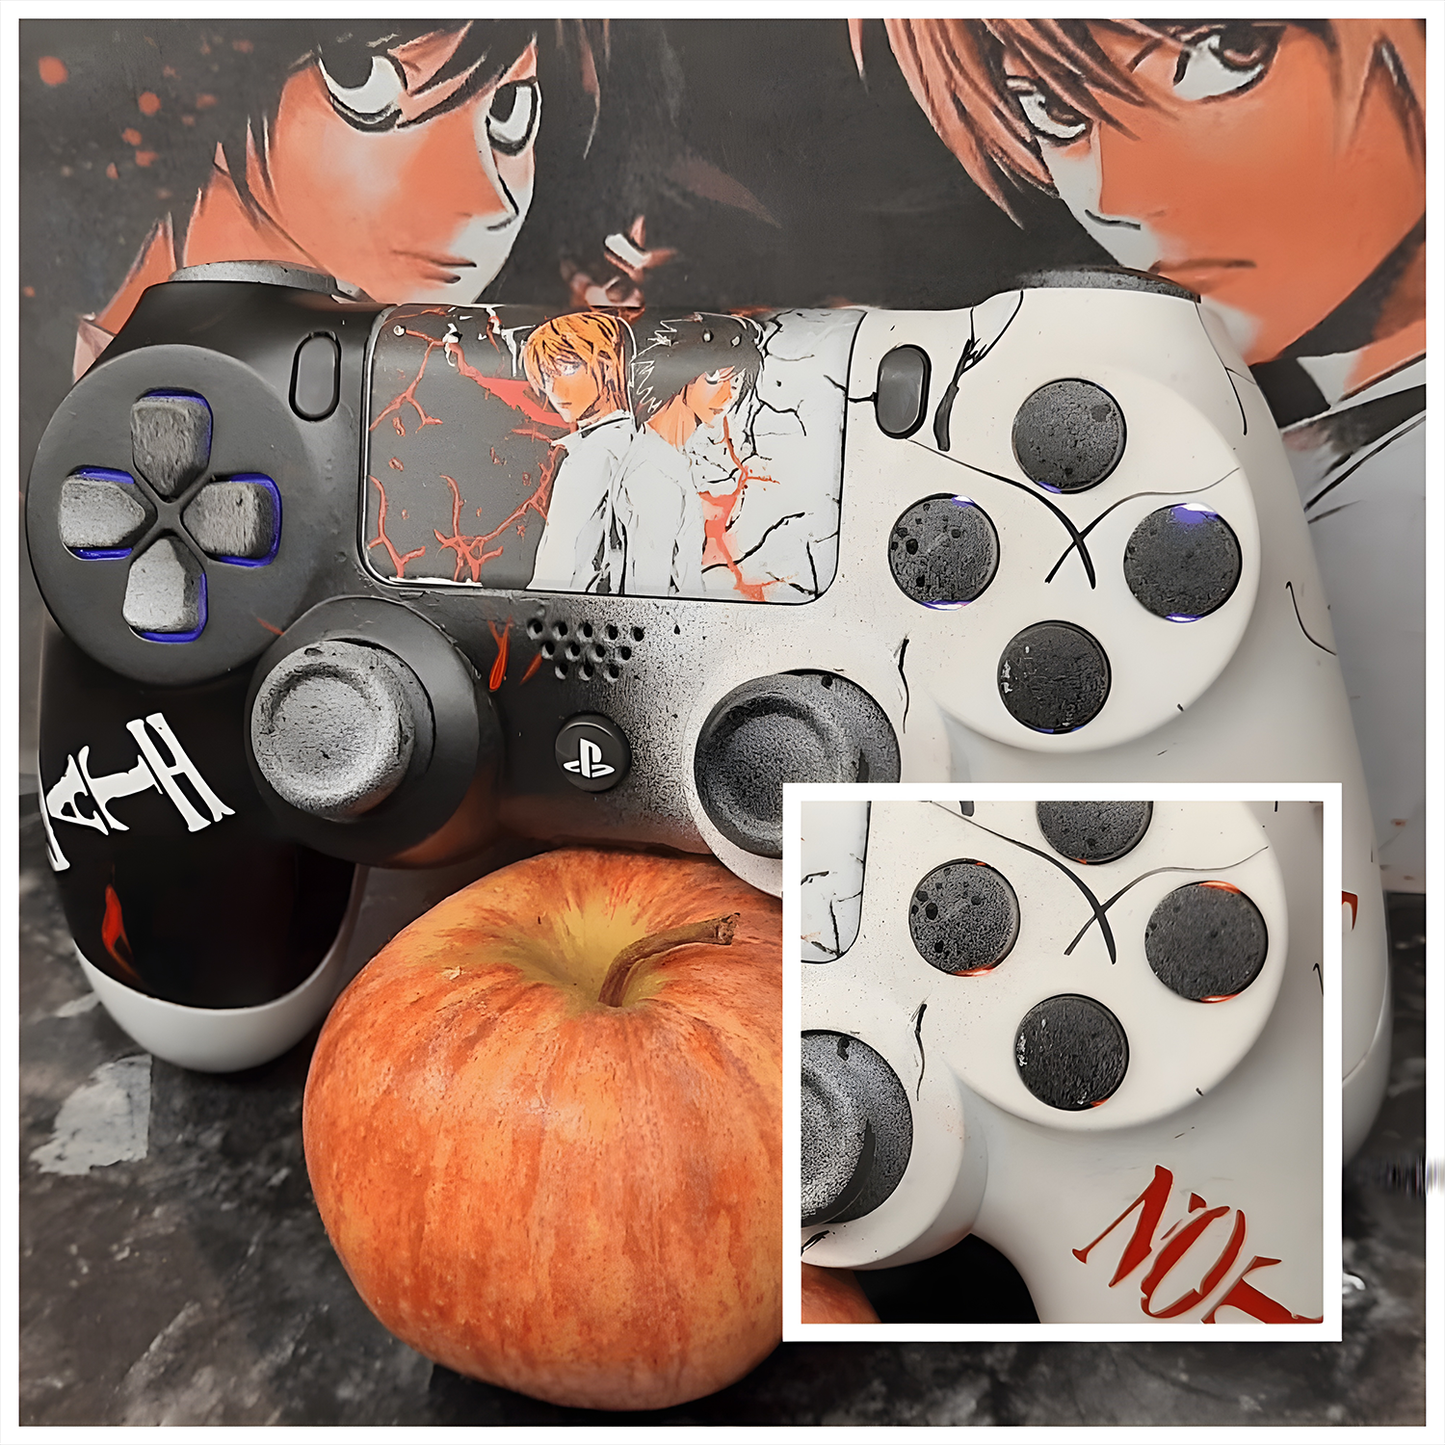 Personalised death note anime sony play station 4 controller